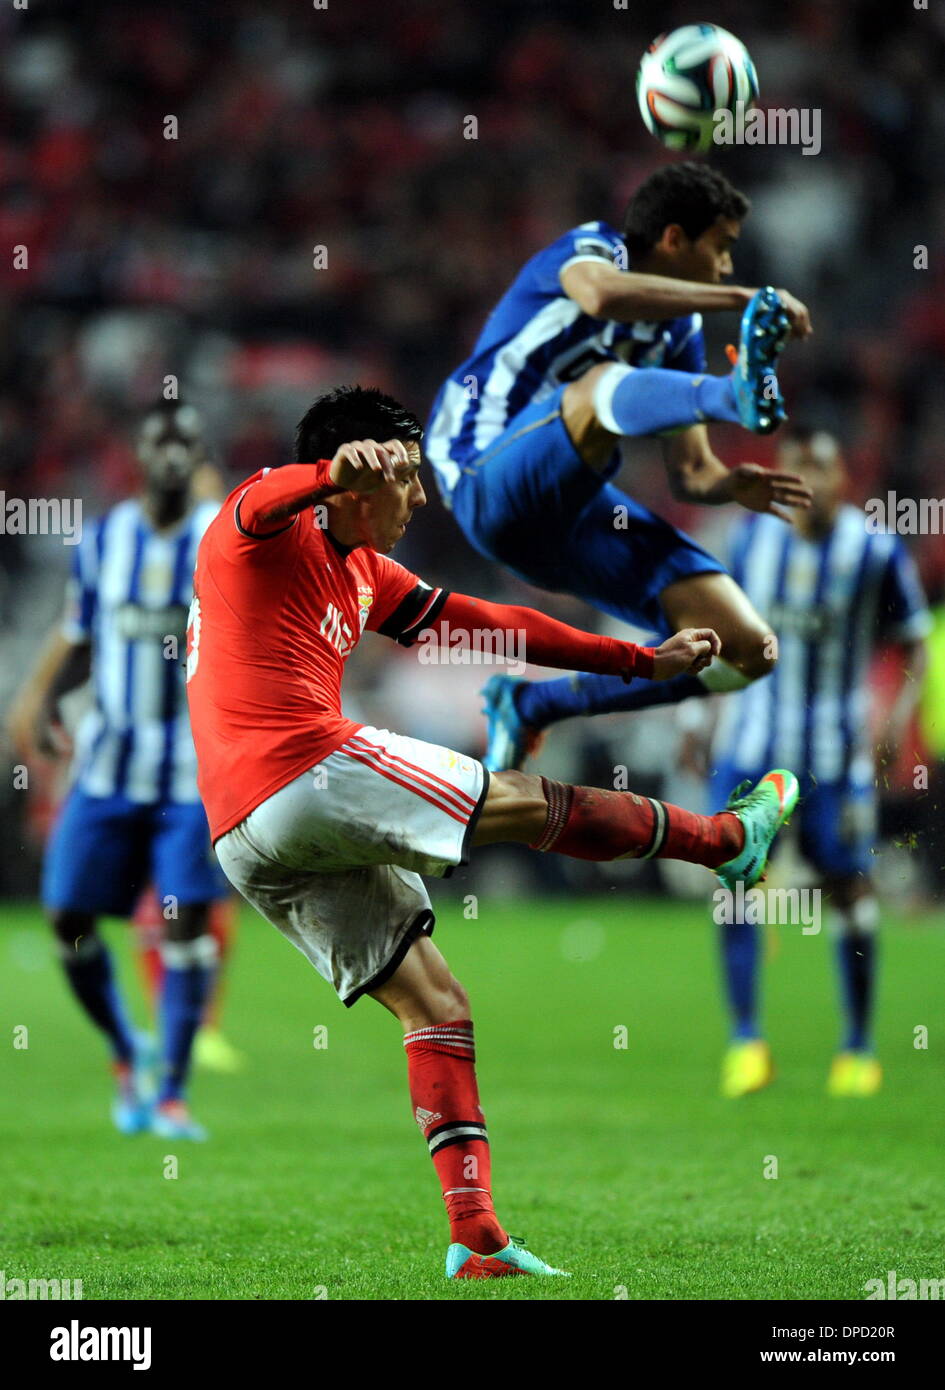 Lisbon, Portugal. 12th Jan, 2014. Benfica's Enzo Perez(L) vies for the ball during the Portuguese league football match against FC Porto at the Estadio Da Luz in Lisbon, Portugal, on Jan. 12, 2014. Benfica won 2-0. Credit:  Zhang Liyun/Xinhua/Alamy Live News Stock Photo